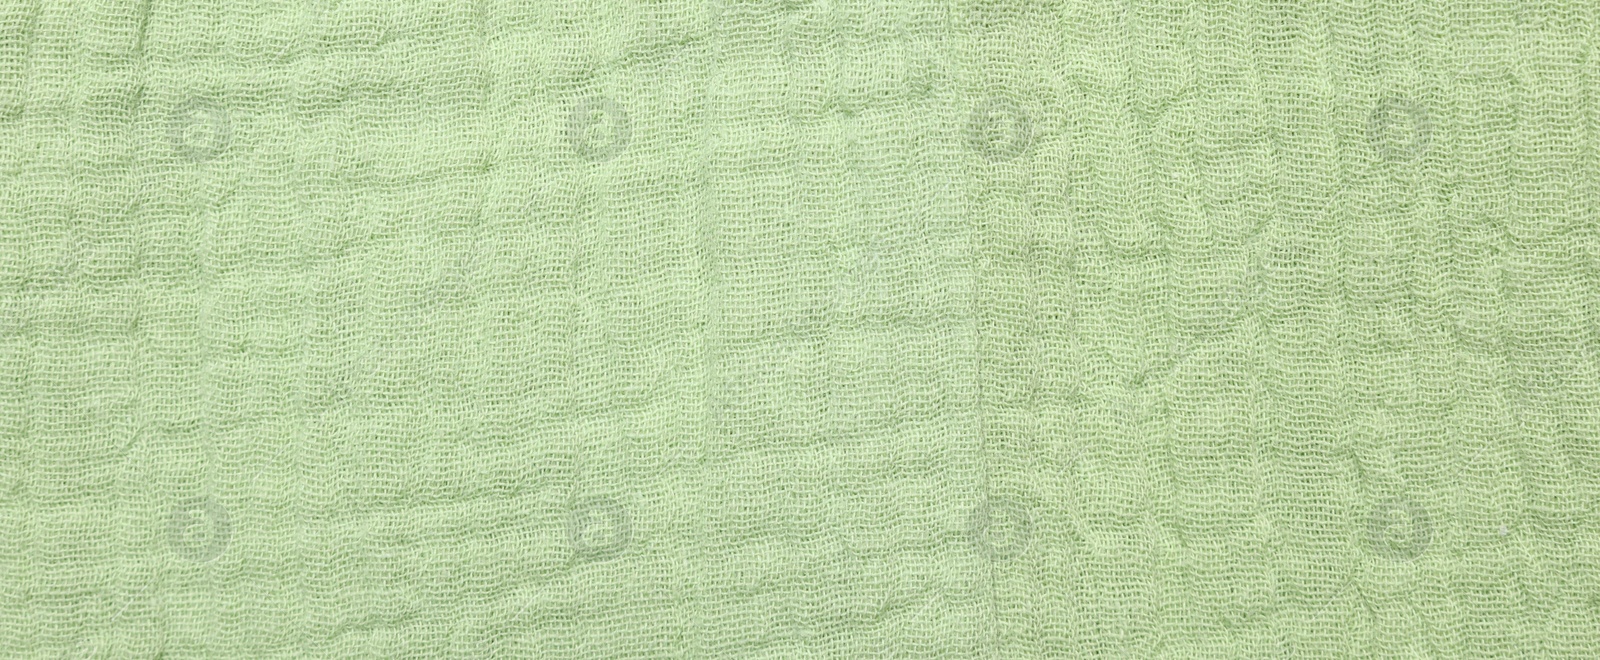 Photo of Texture of light green fabric as background, top view